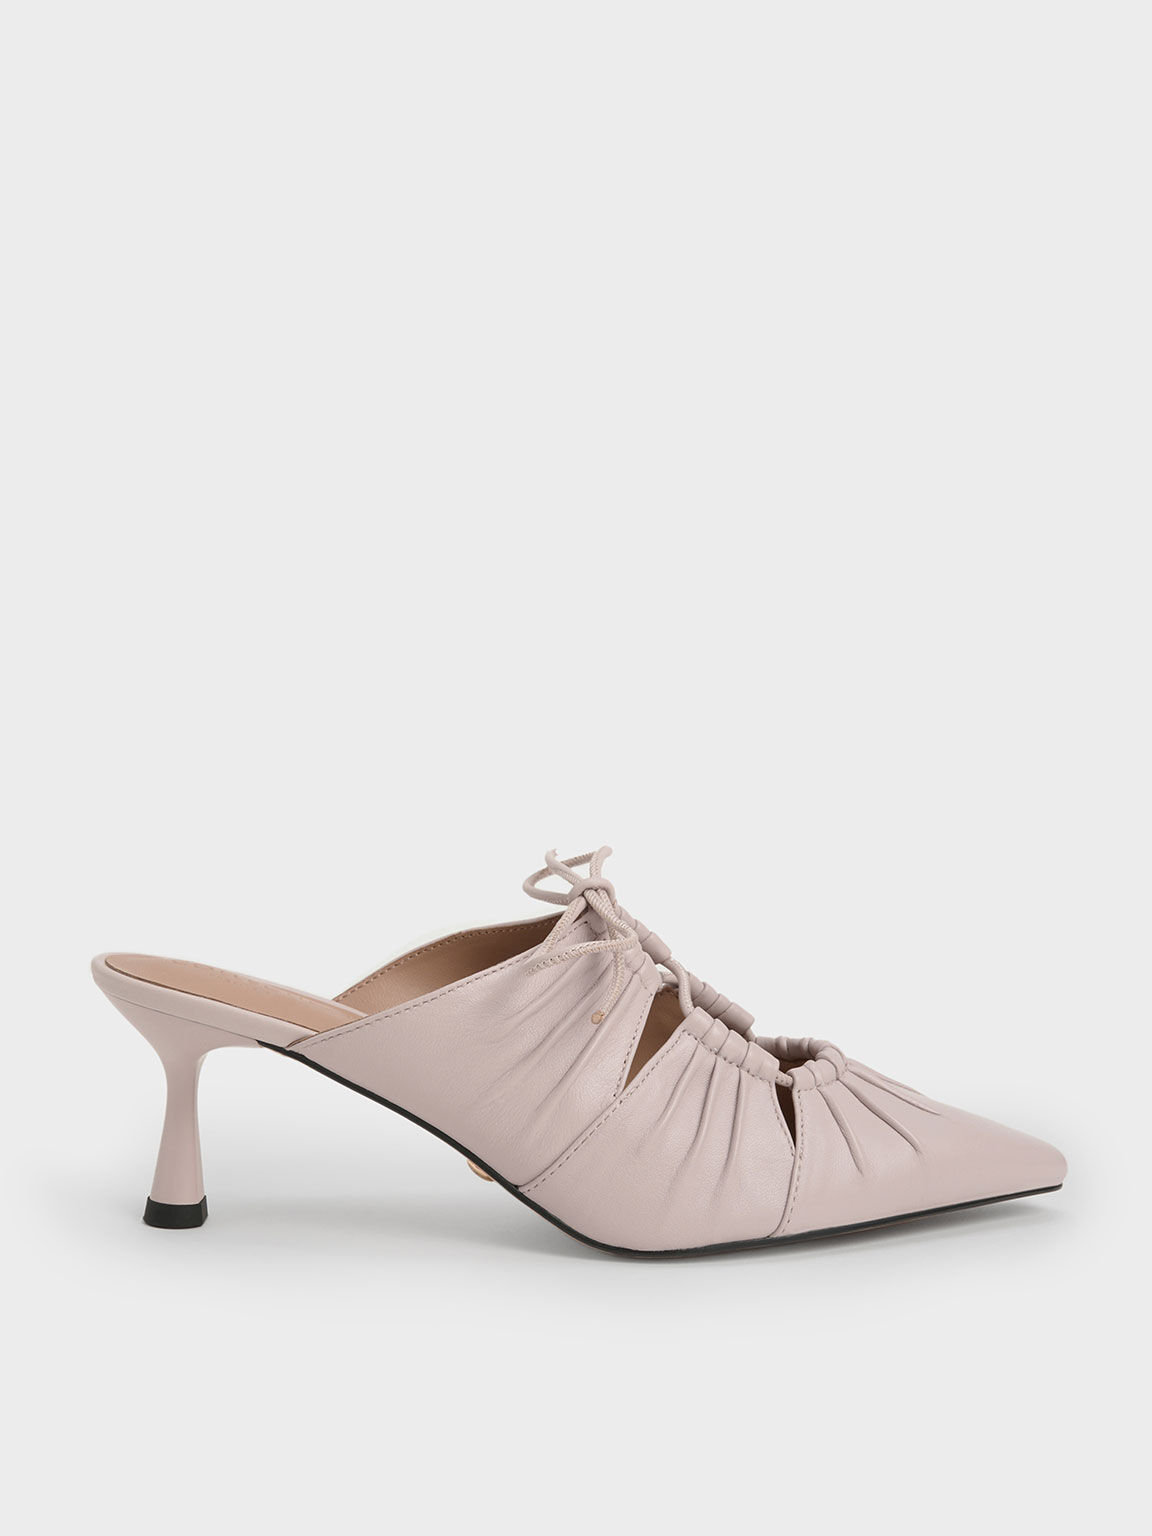 Landis Leather Ruched Bow-Tie Mules, Pink, hi-res